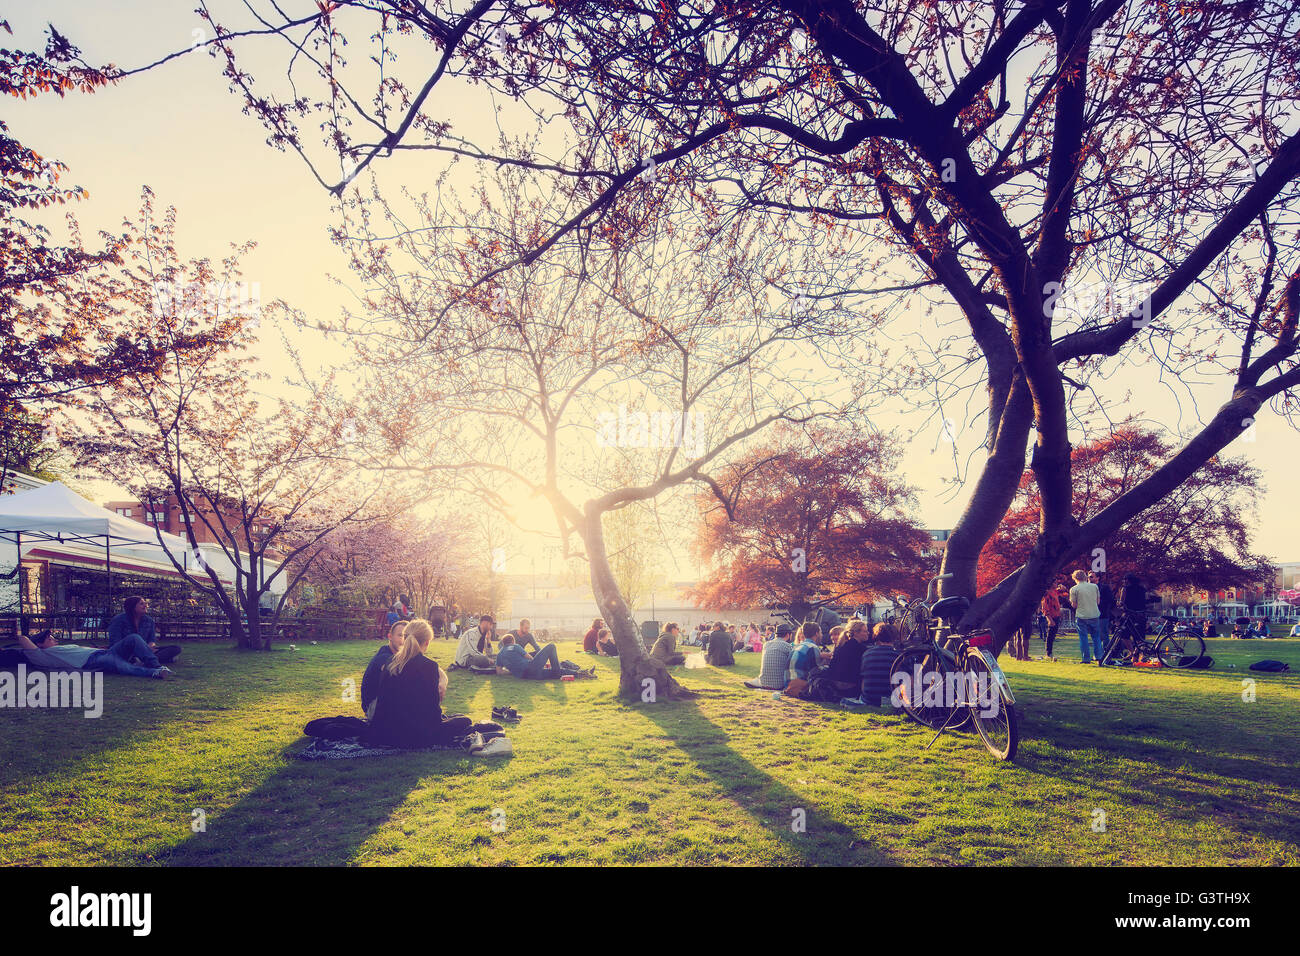 Sweden, Skane, Malmo, People sitting on grass in park Stock Photo